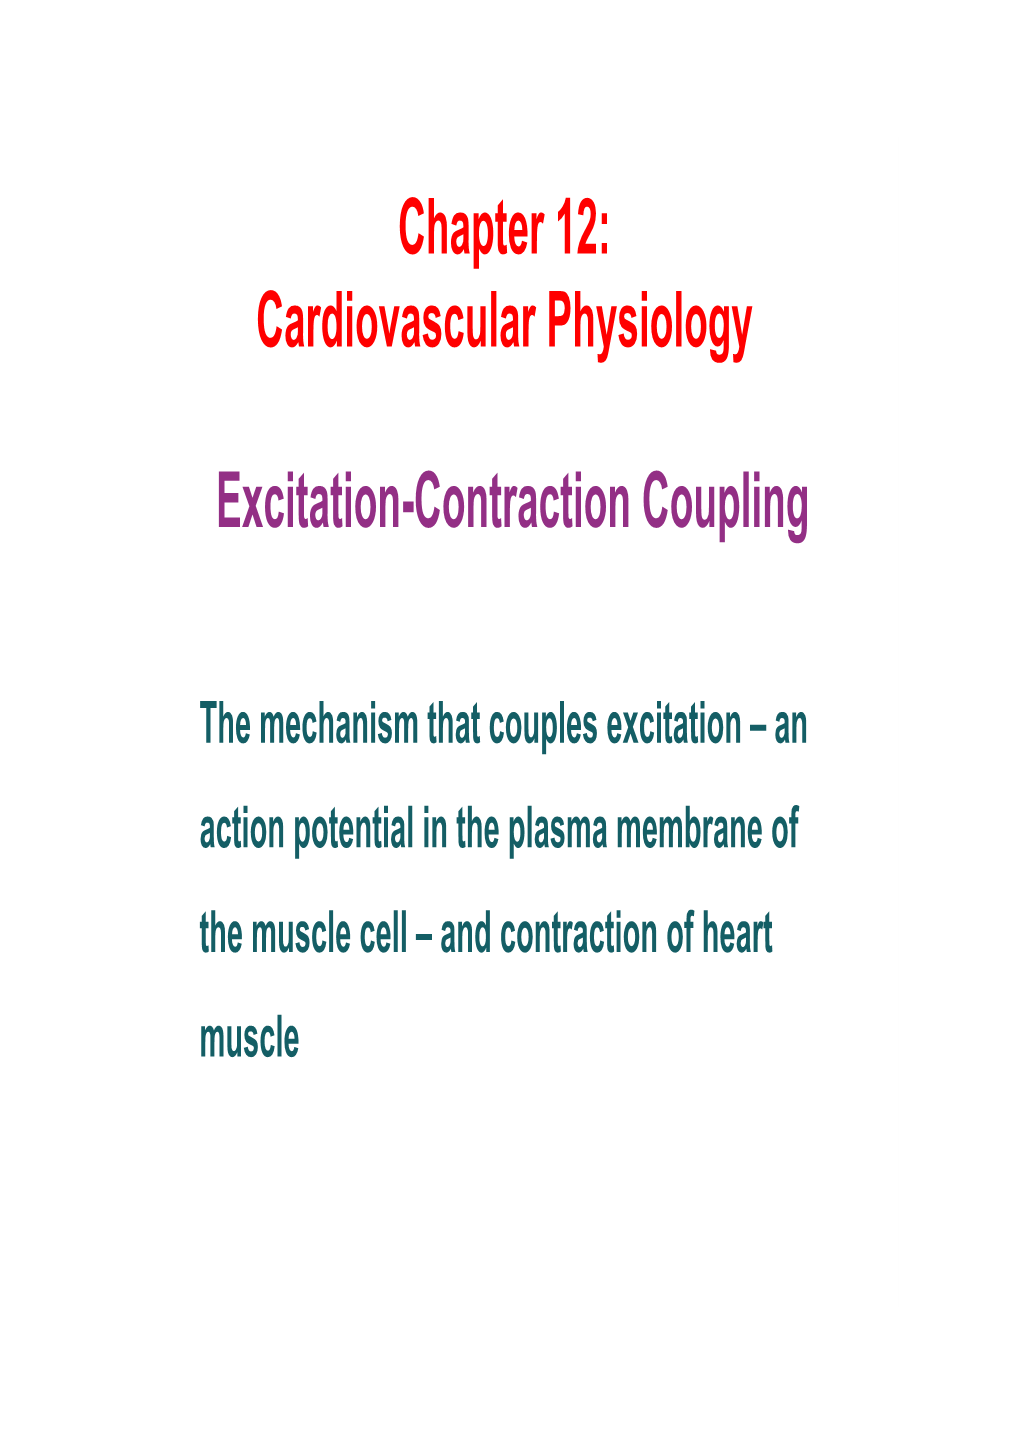 Cardiovascular Physiology Excitation-Contraction Coupling